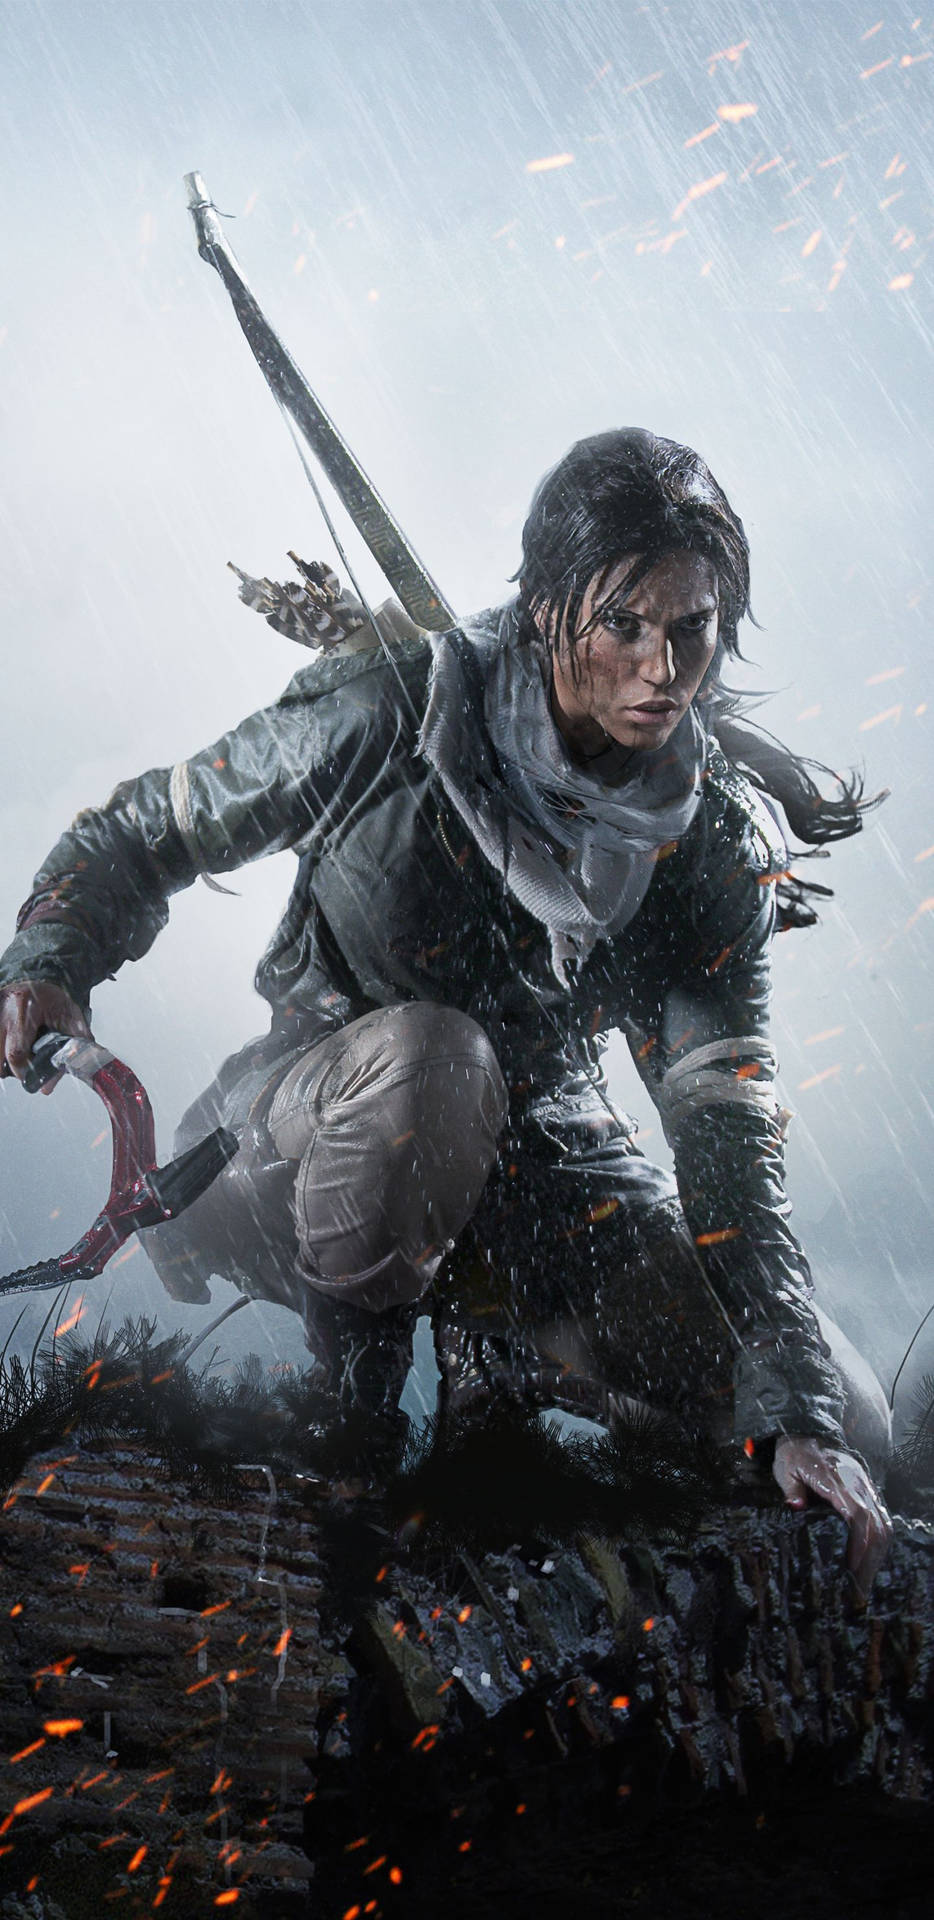 Get On the Go With the All New Lara Croft iPhone Wallpaper